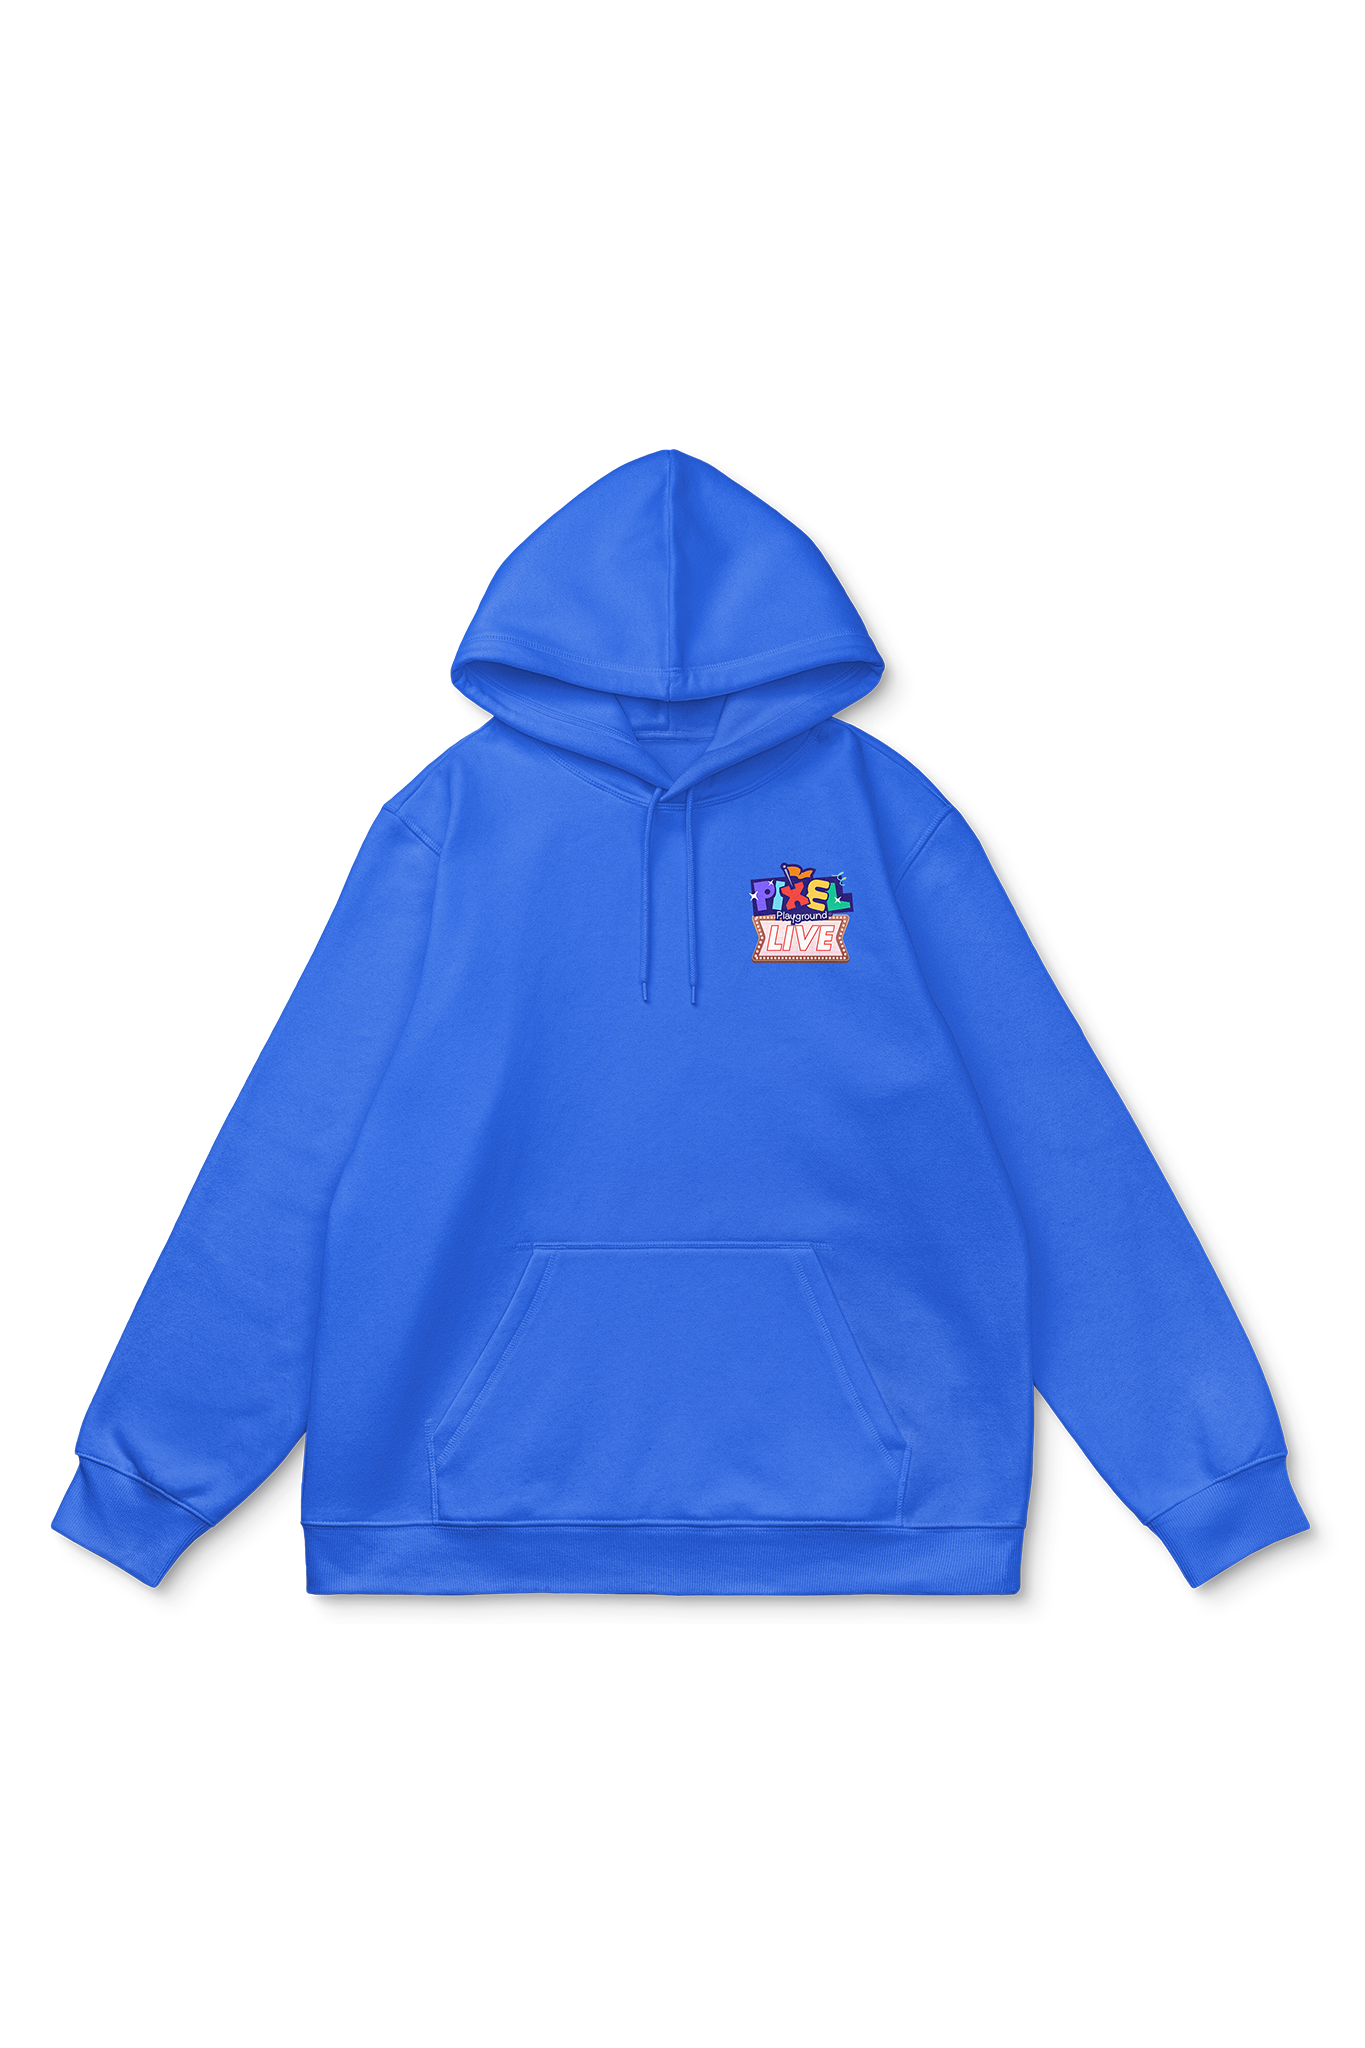 Royal blue hoodie with the Pixel Playground print positioned on the top right in the front.